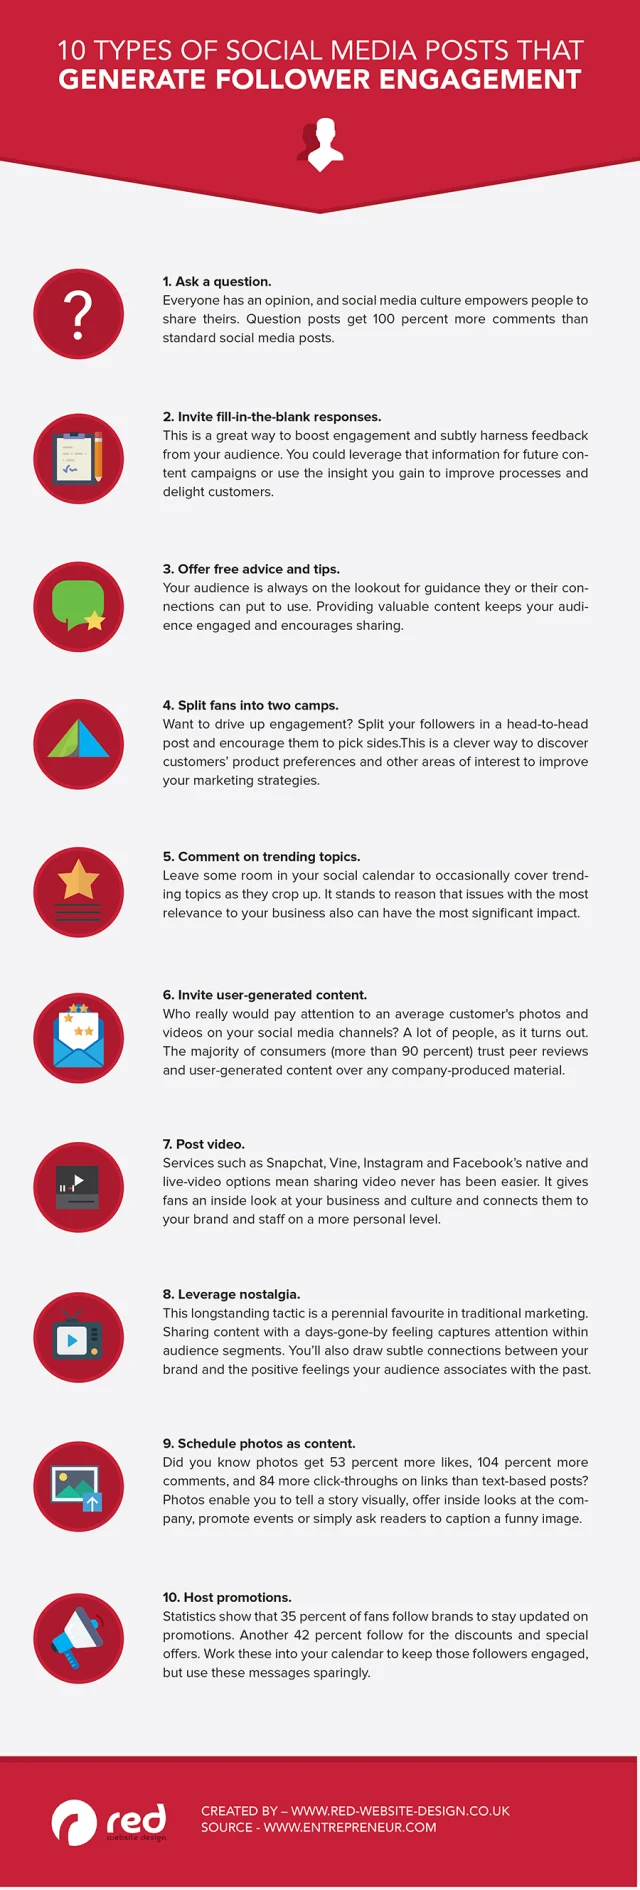  10 Types of Social Media Posts That Generate Engagement With Followers [Infographic]